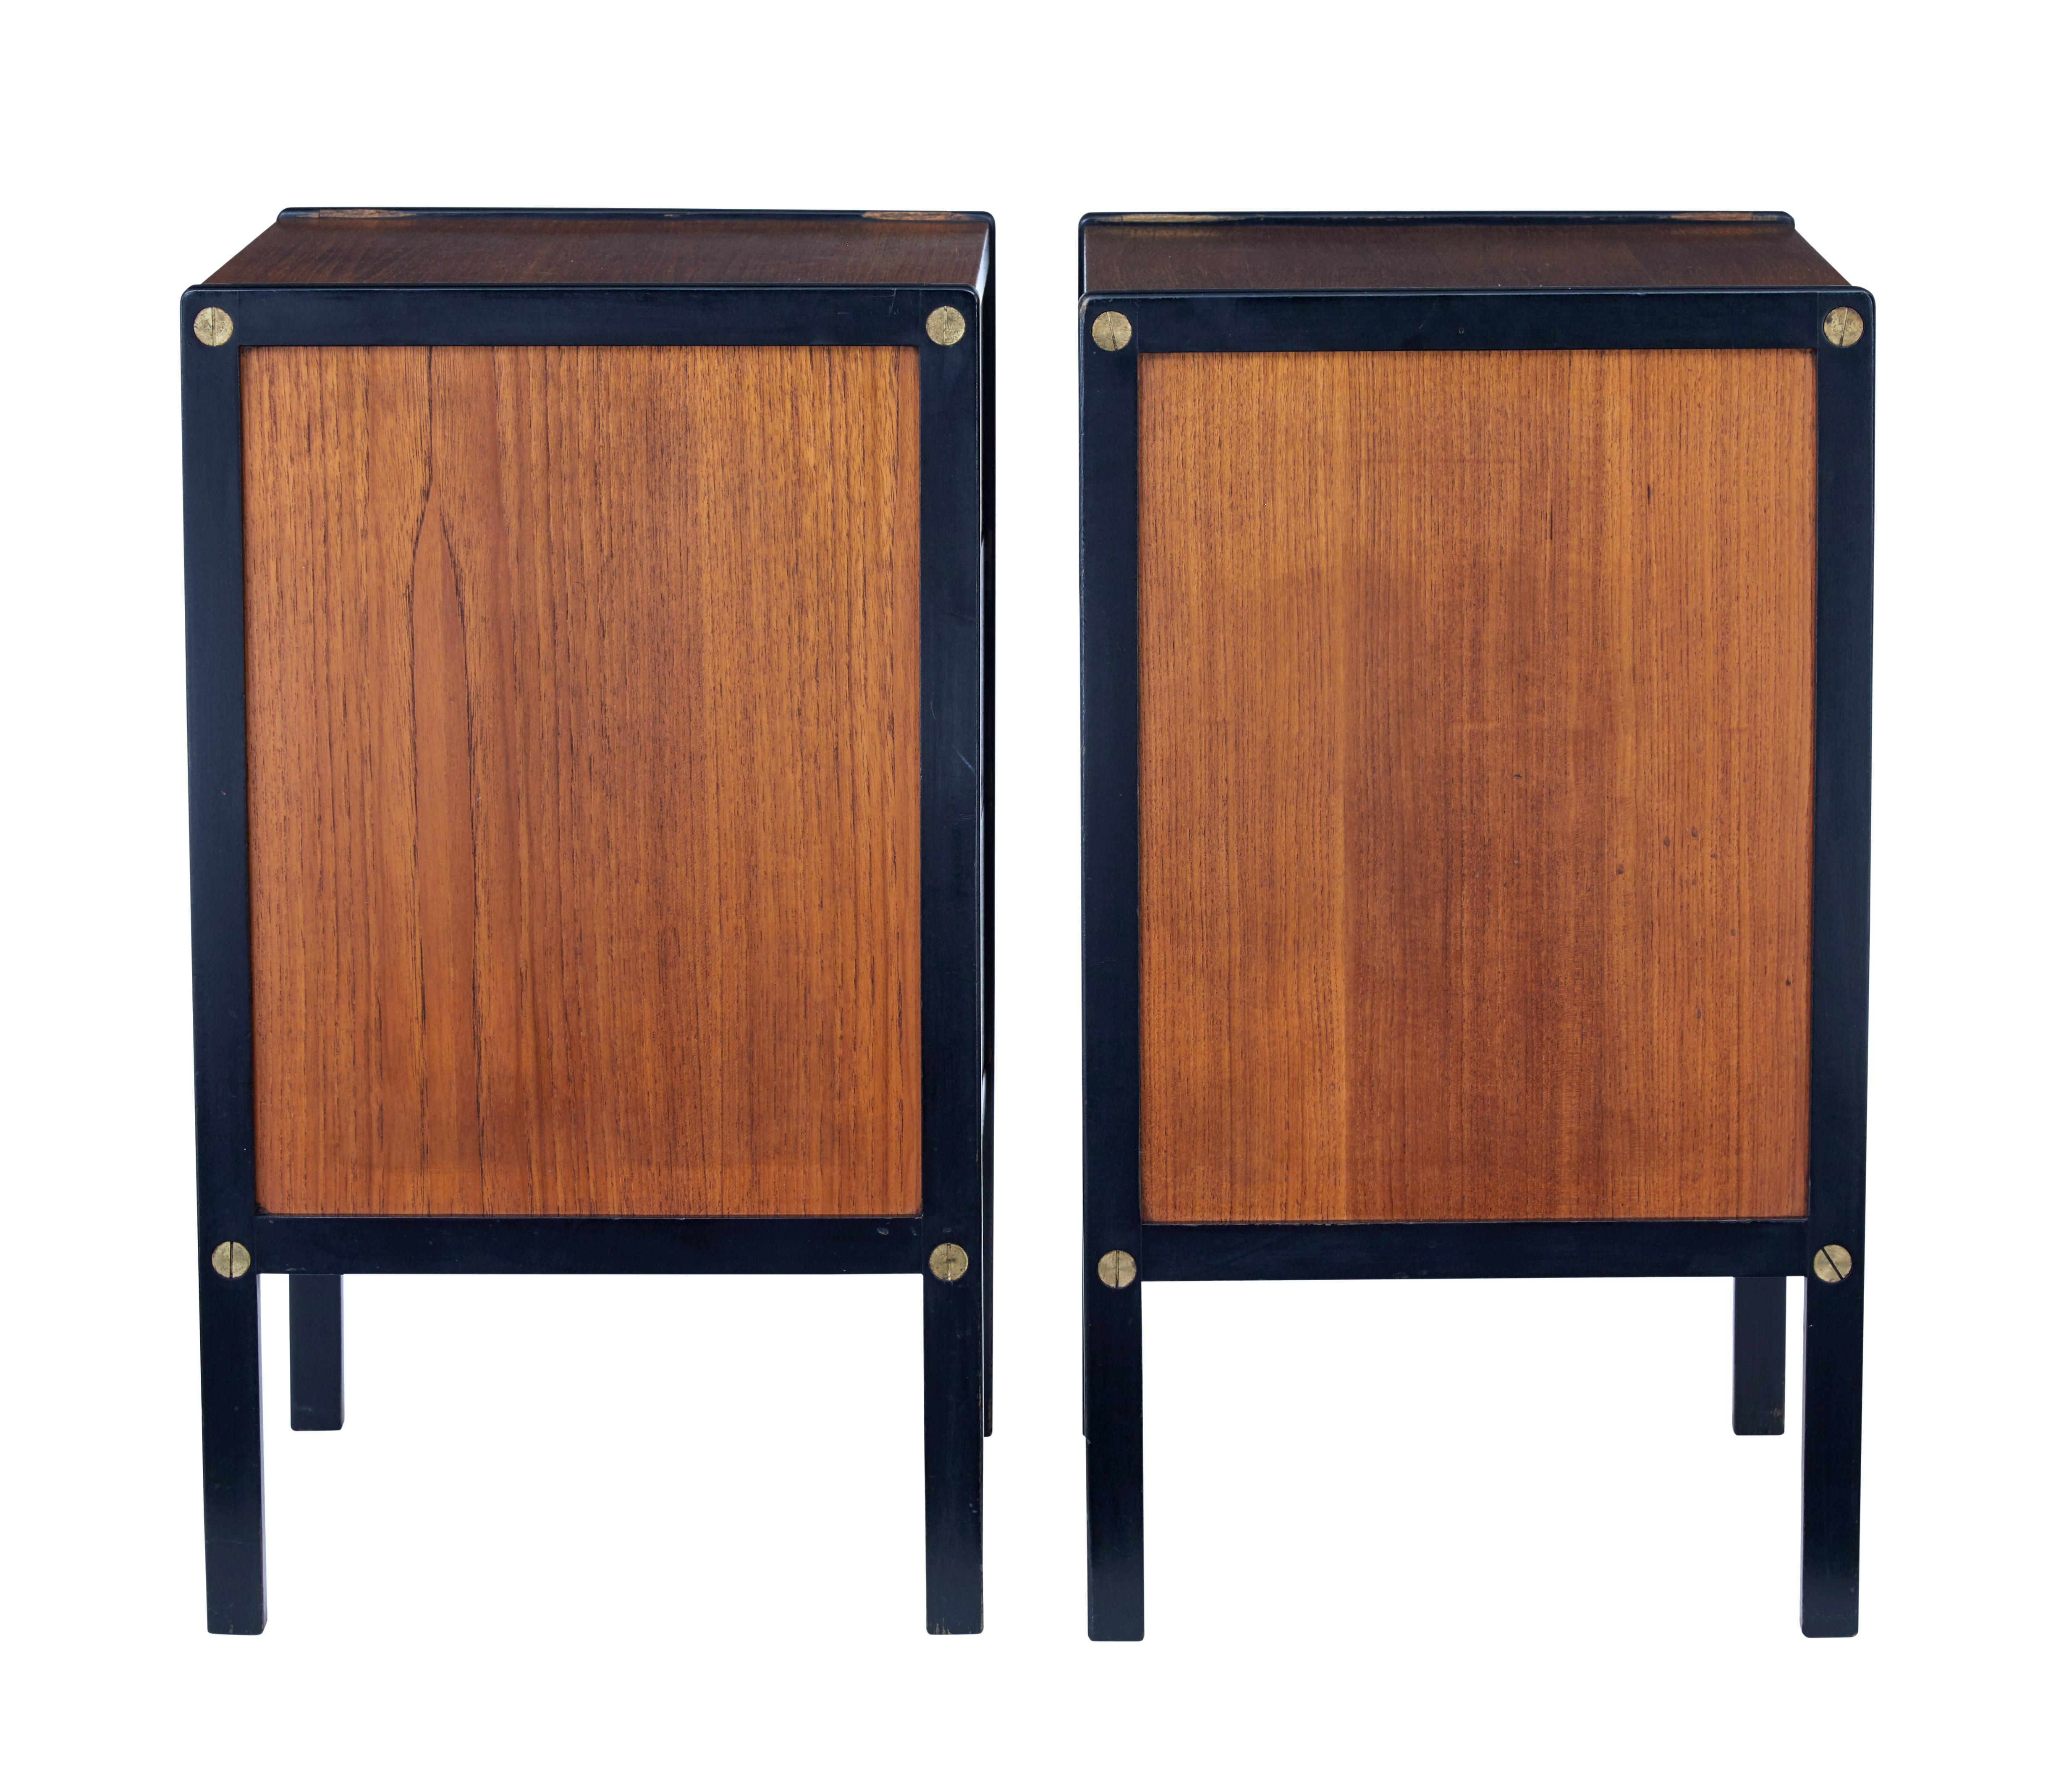 Woodwork Pair of Mid-20th Century Scandinavian Teak Bedside Chests by Bodafors